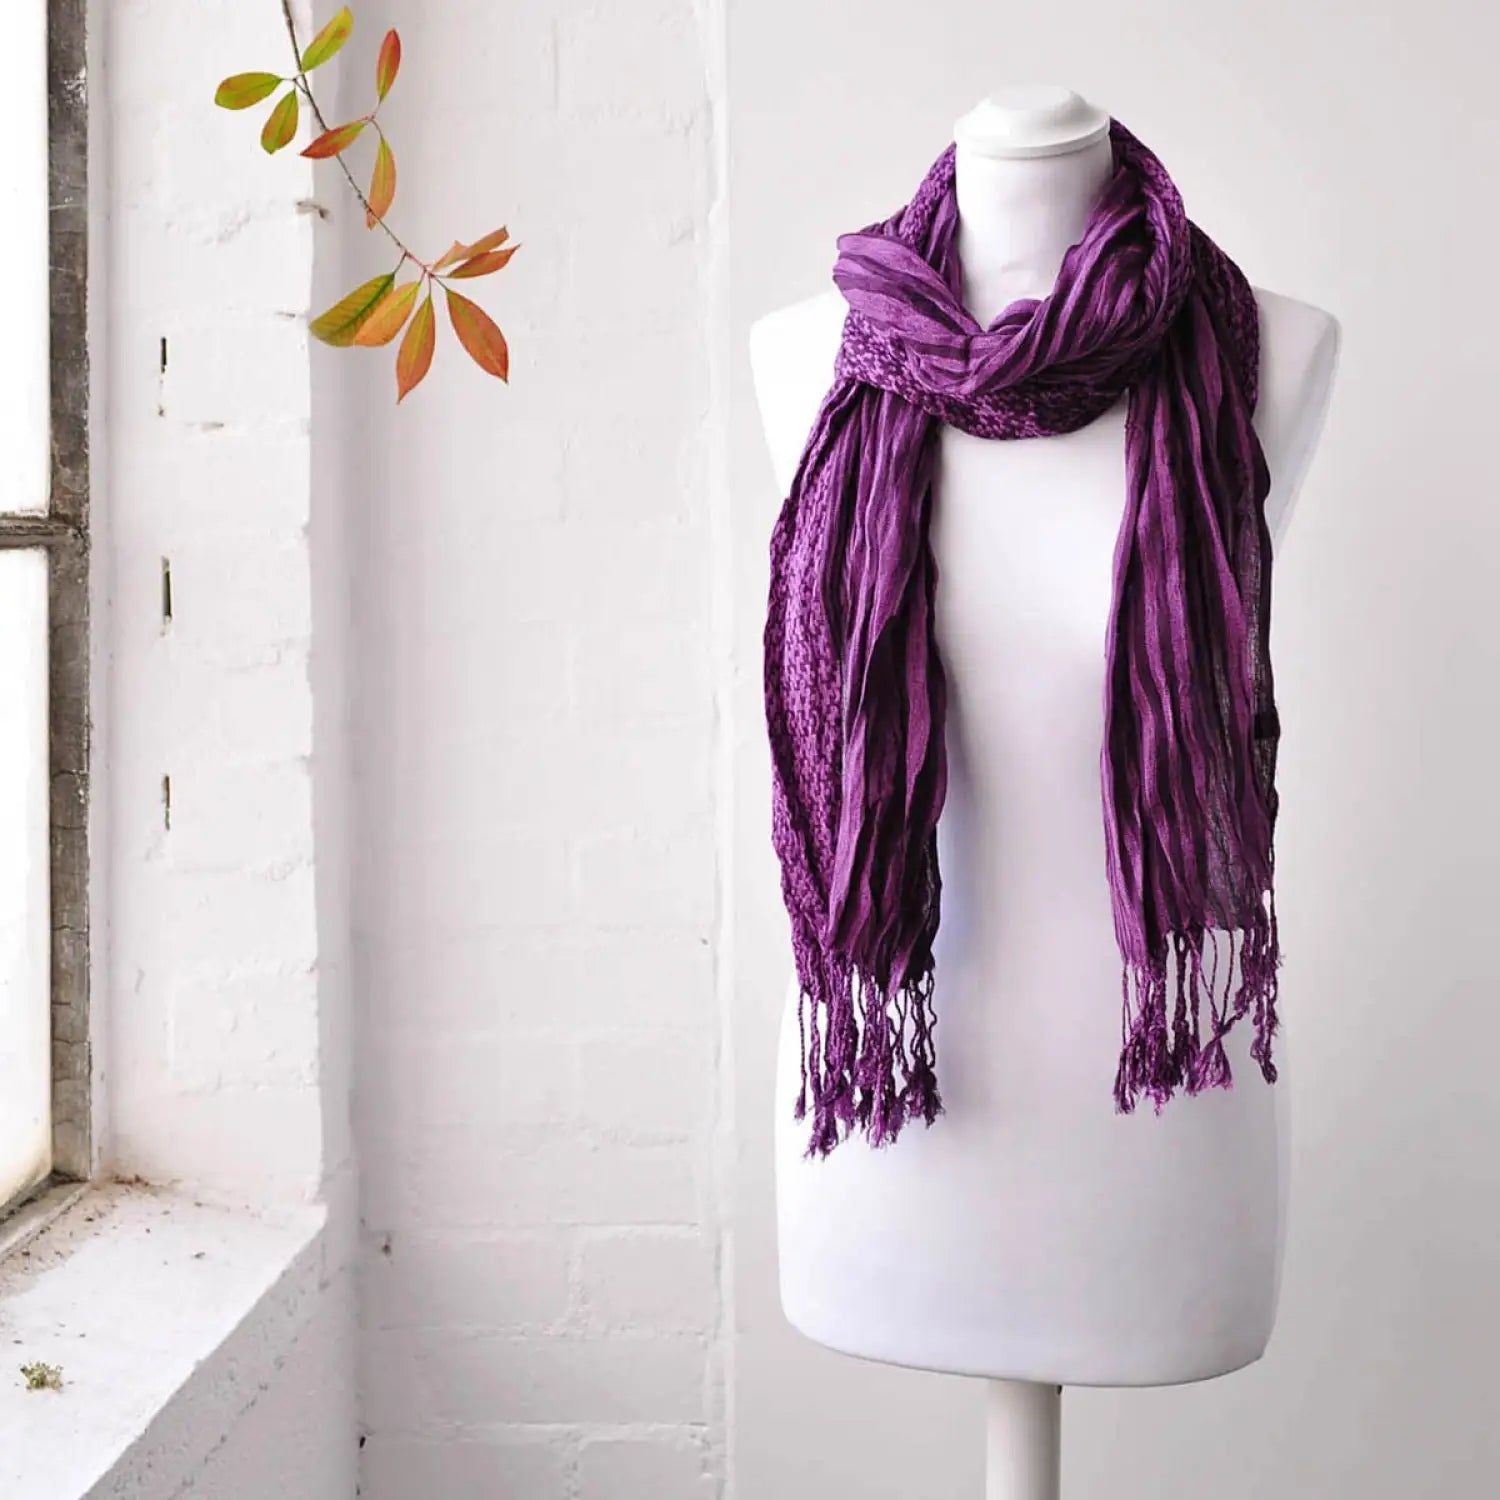 Elegant striped woven winter scarf on mannequin by window